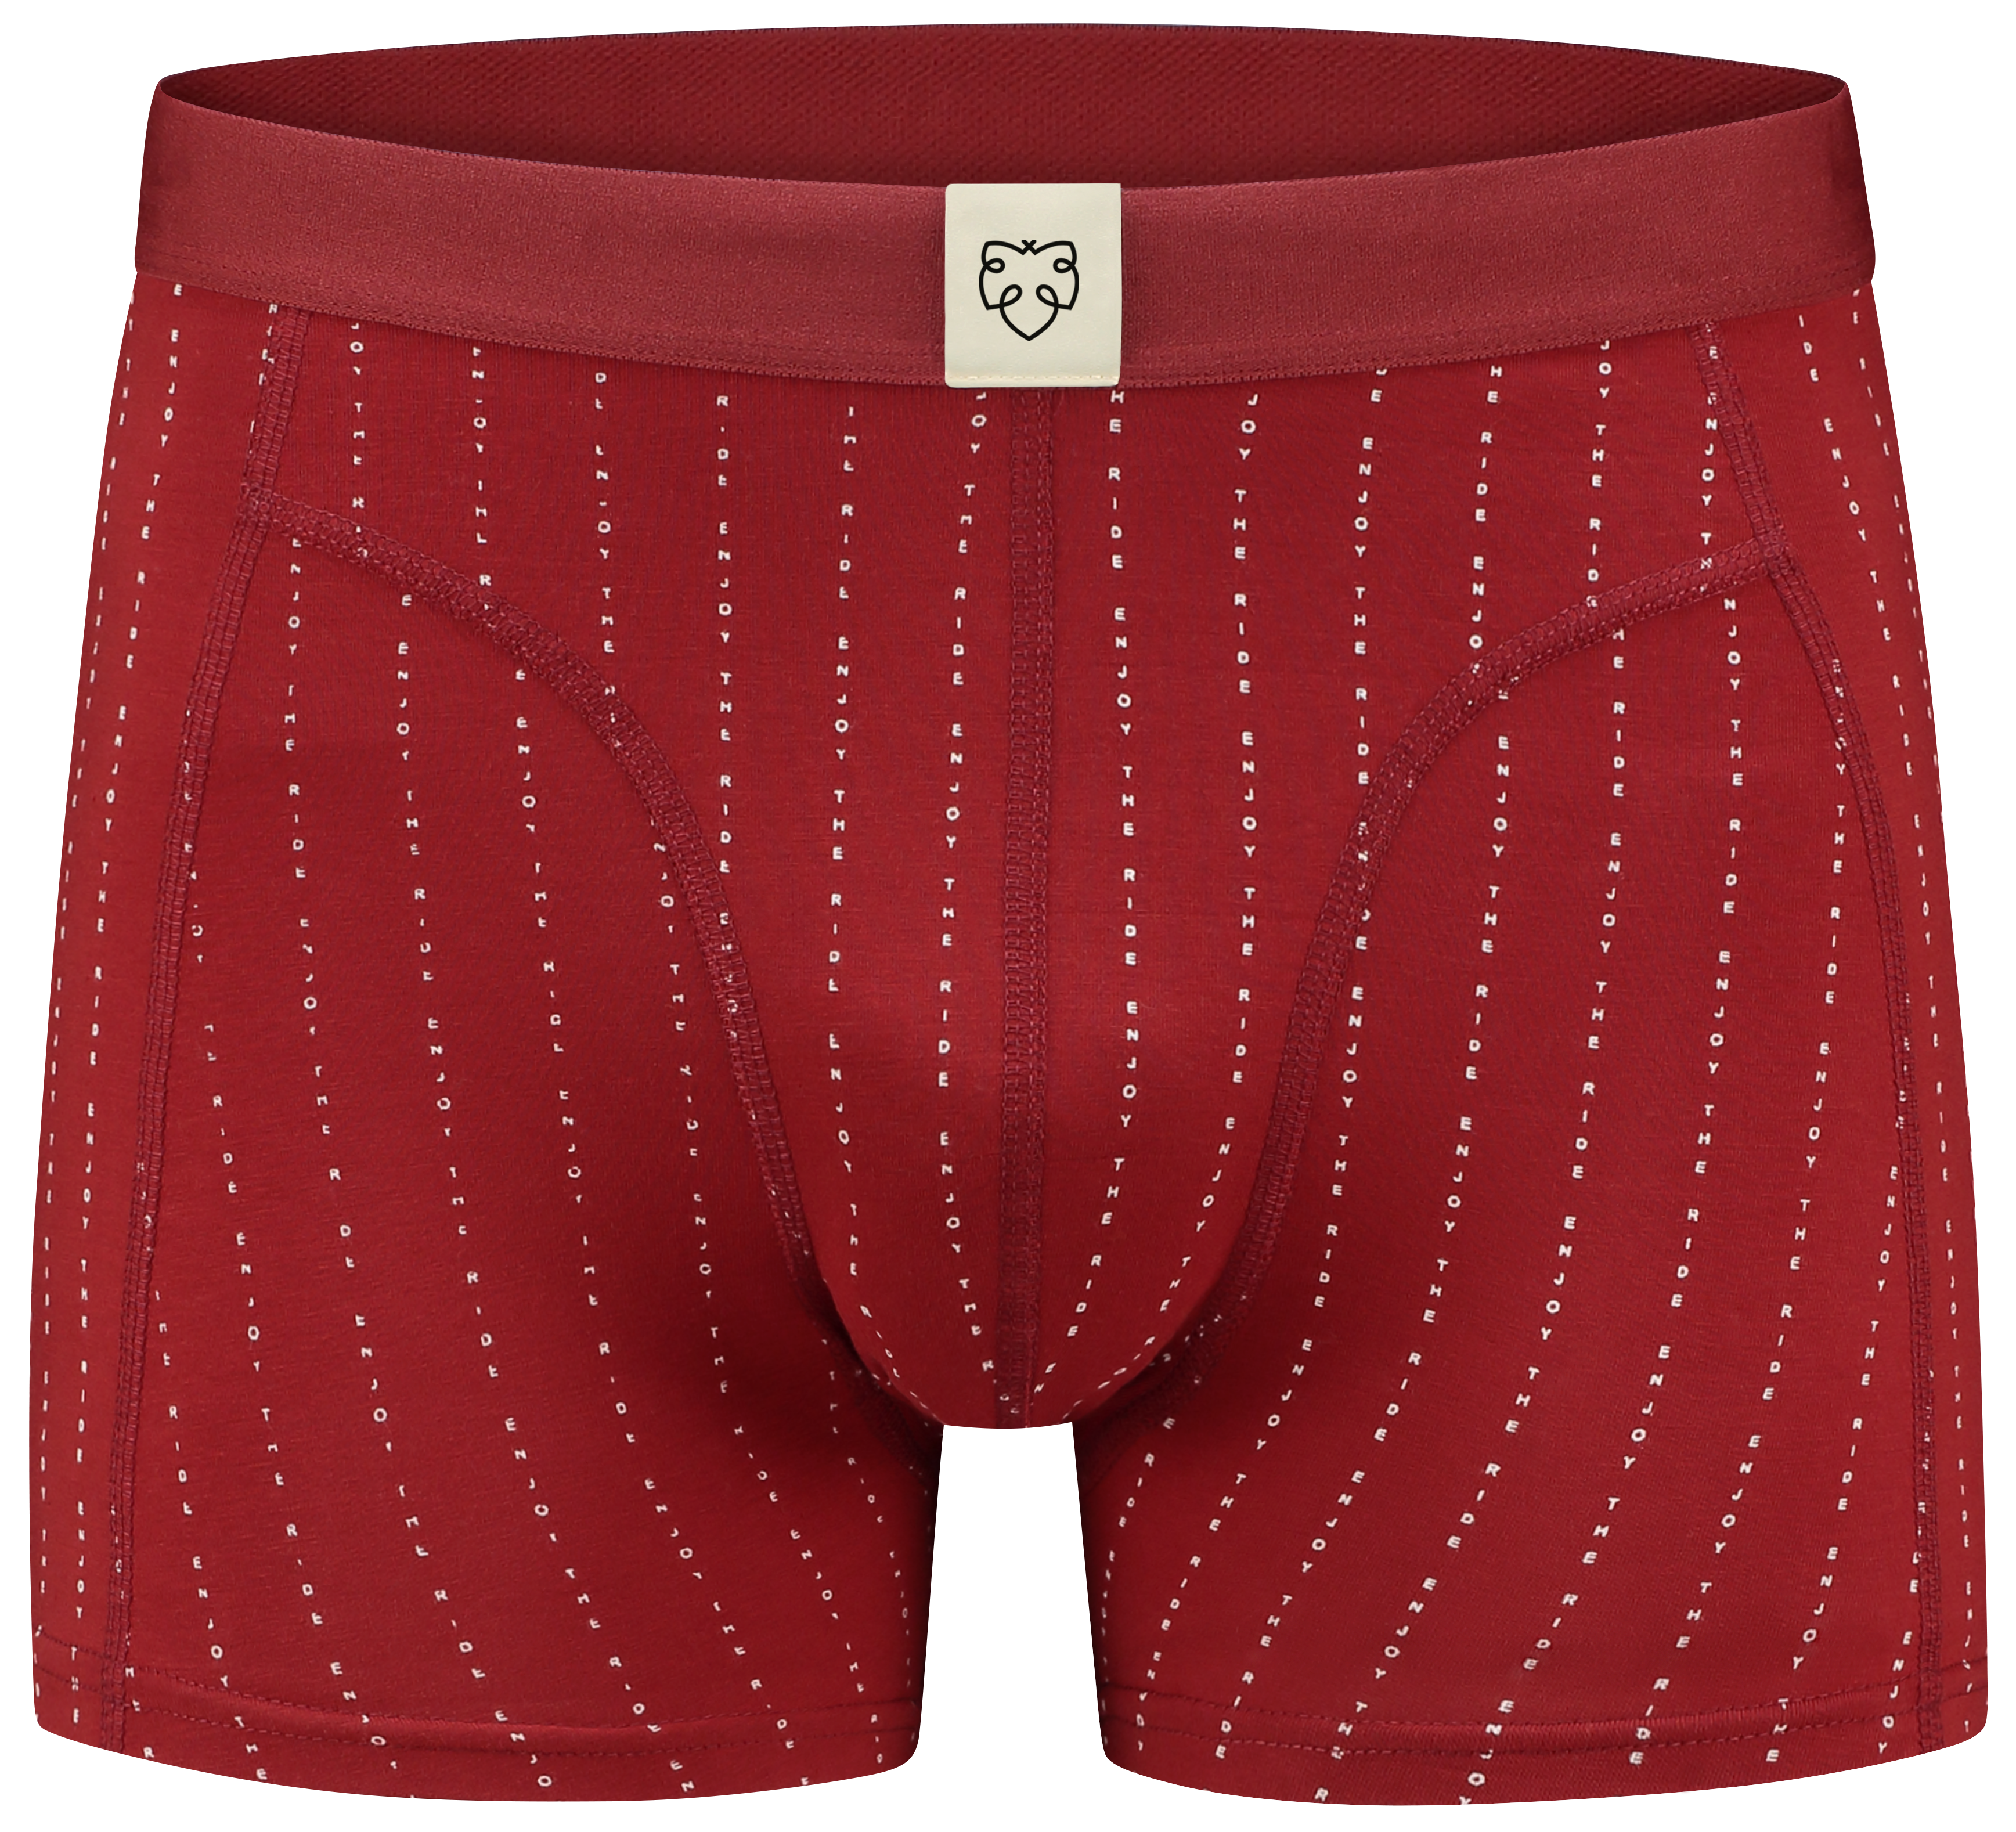 A-dam boxer brief with enjoy the ride from GOTS pure organic